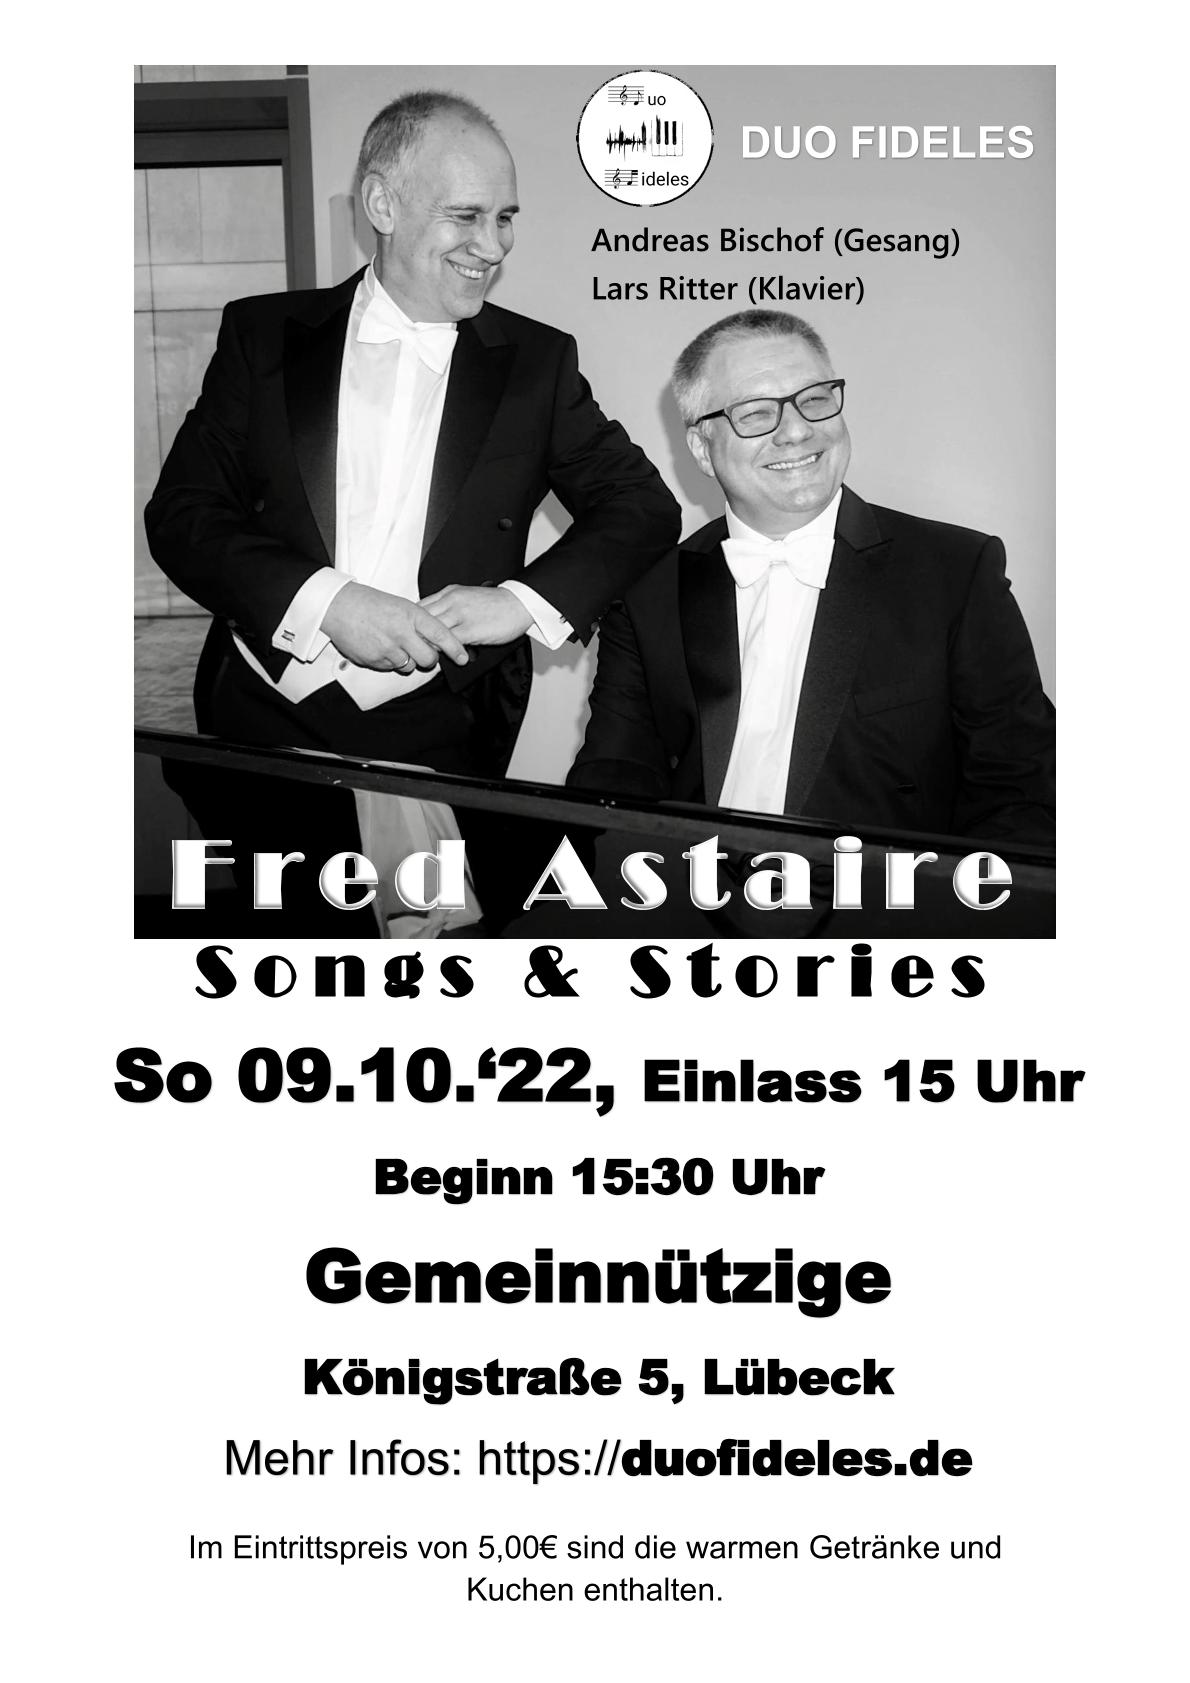 Fred Astaire Songs & Stories